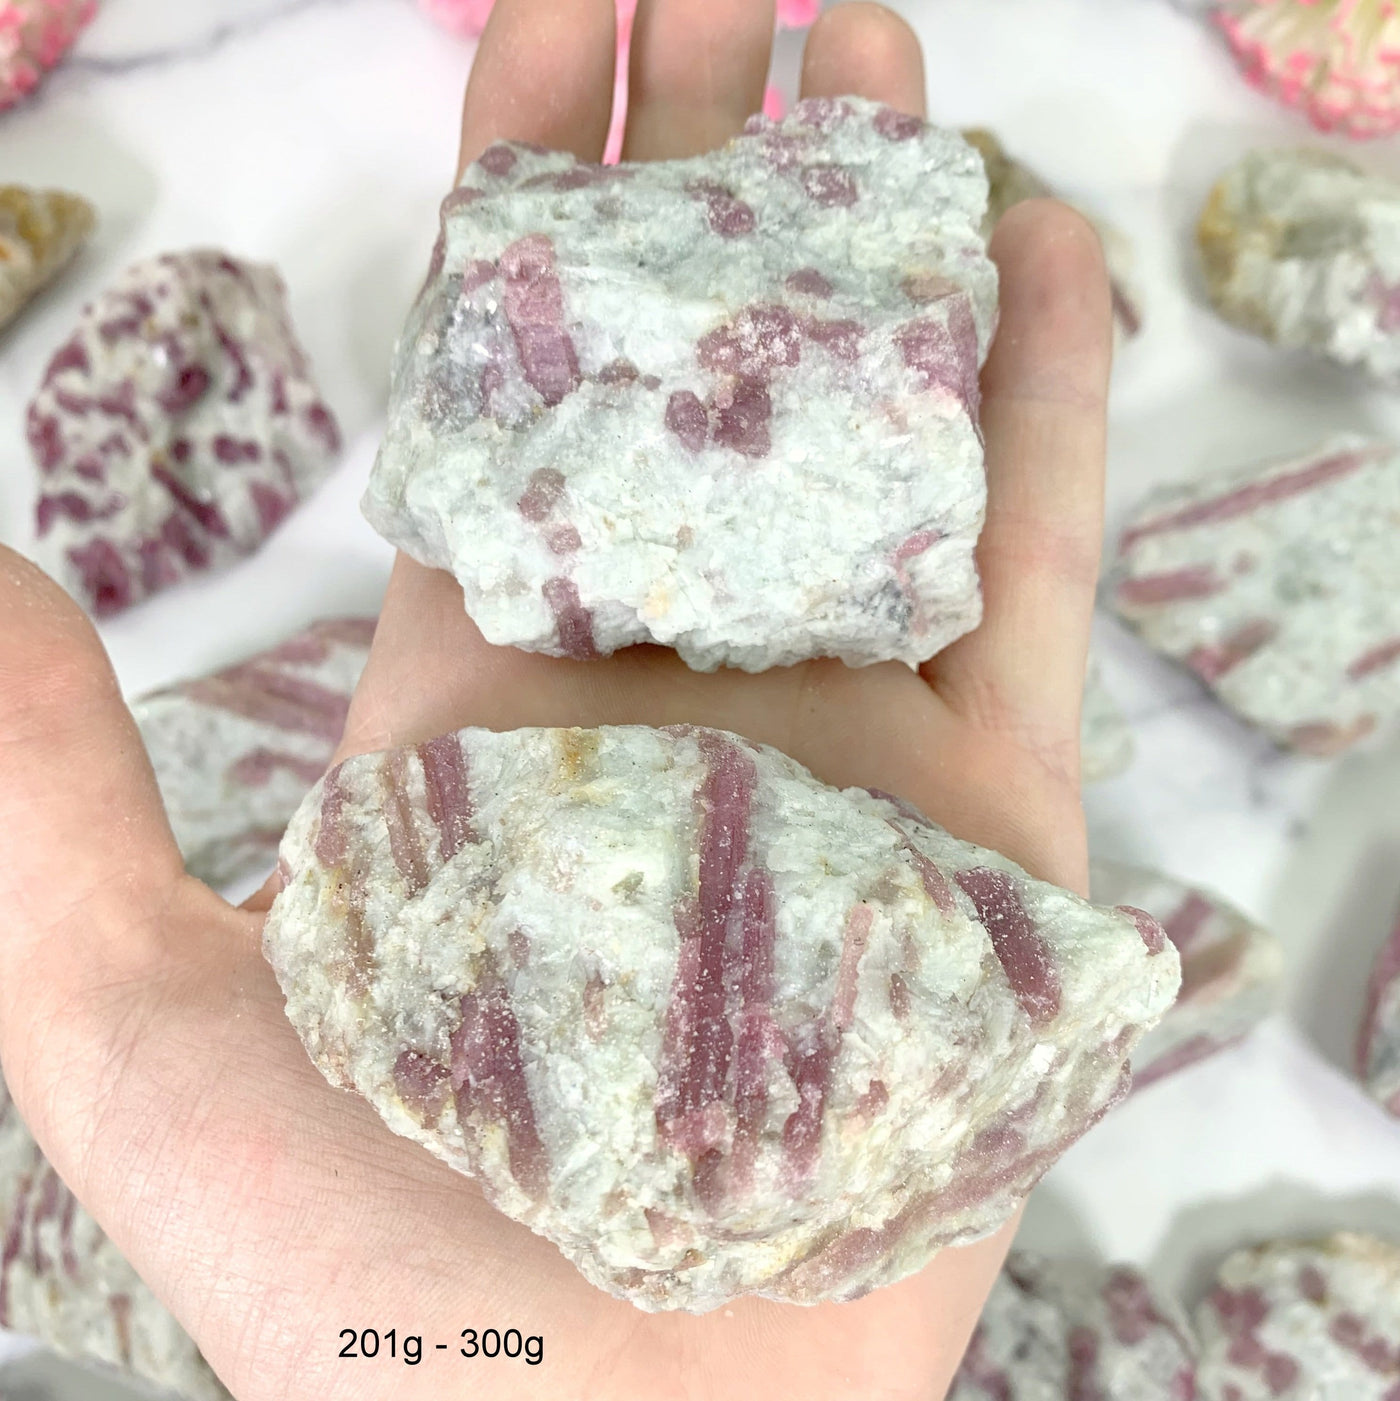 atural Pink Tourmaline with Mica on Matrix - 2 in a hand